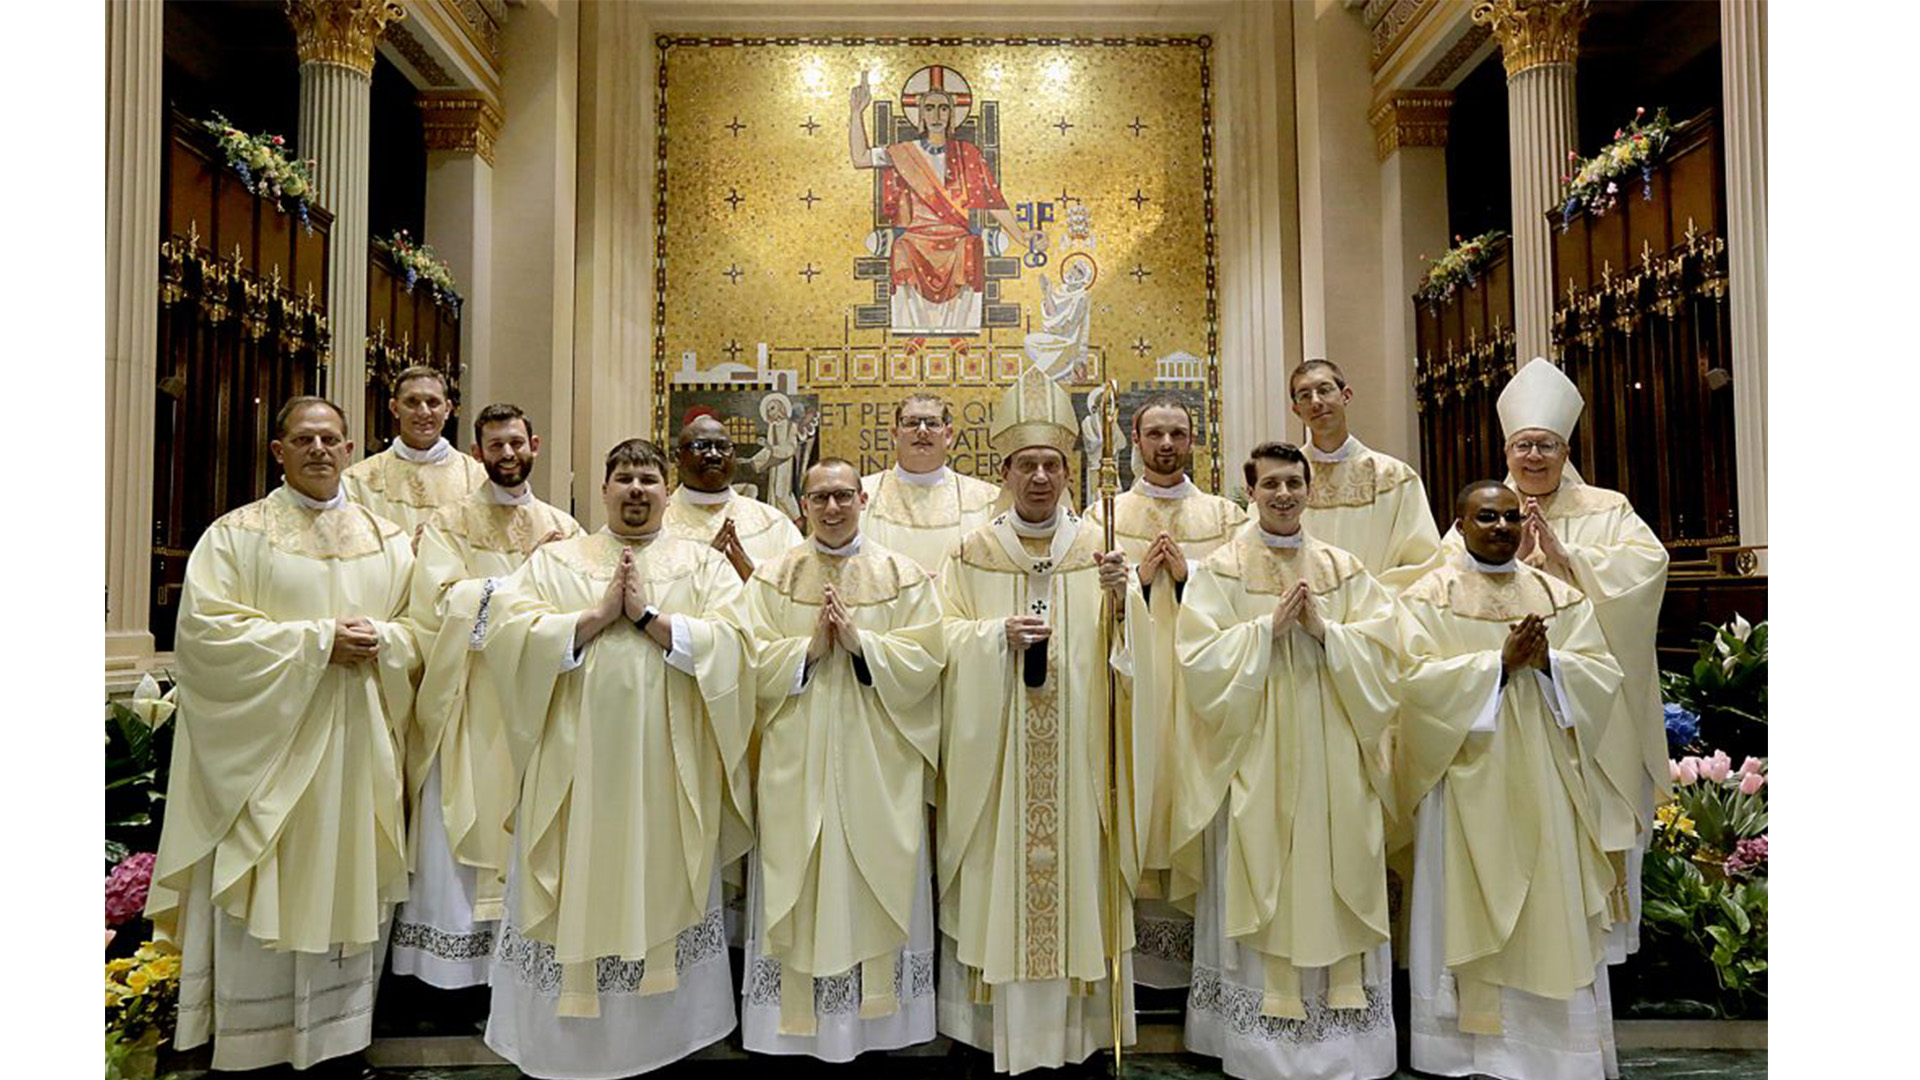 Ordination 2019: Front Row from L to R: Father Anthony Brausch, Father Mark Bredstege, Father Jeff Stegbauer, Archbishop Dennis M. Schnurr, Father Andrew Hess, Father Alex Biryomumeisho; Back Row L to R, Father Ambrose Dobrozsi, Father Elias Mwesigye, Father Zach Cecil, Father Jedidiah Tritle, Father Christian Cone-Lombarte, and Bishop Joseph Binzer (CT Photo/E L Hubbard)